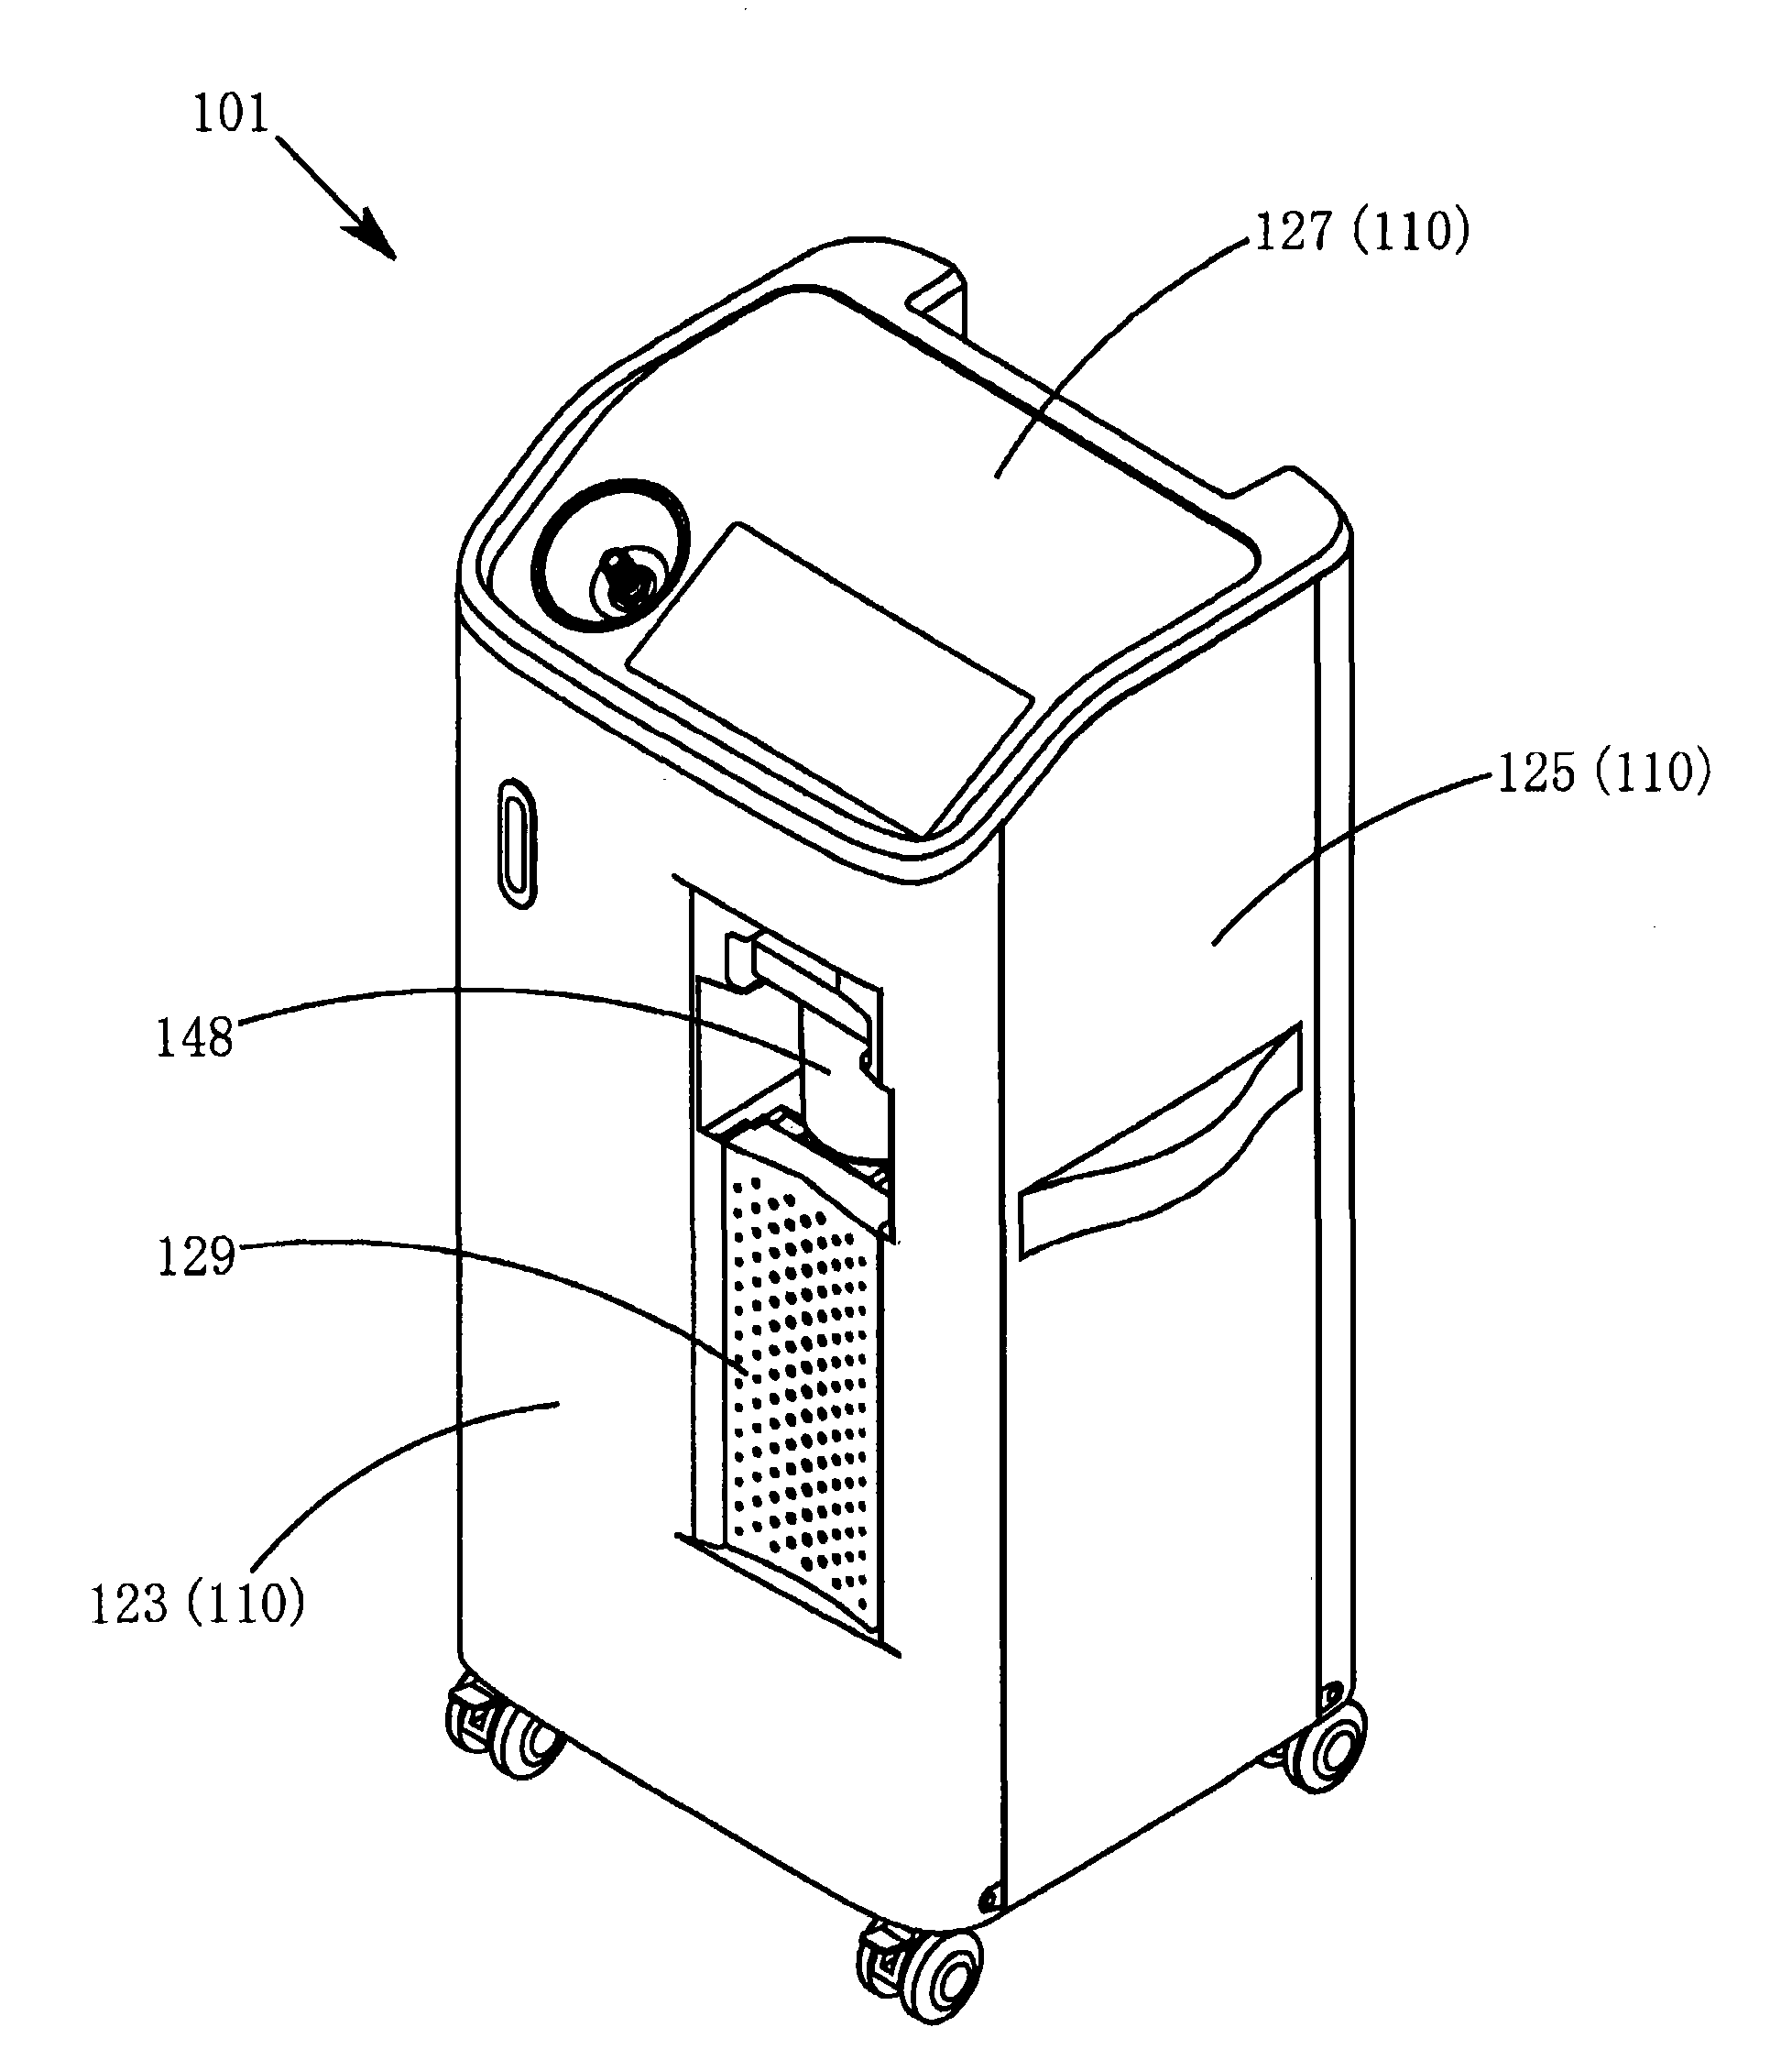 Oxygen concentrating device